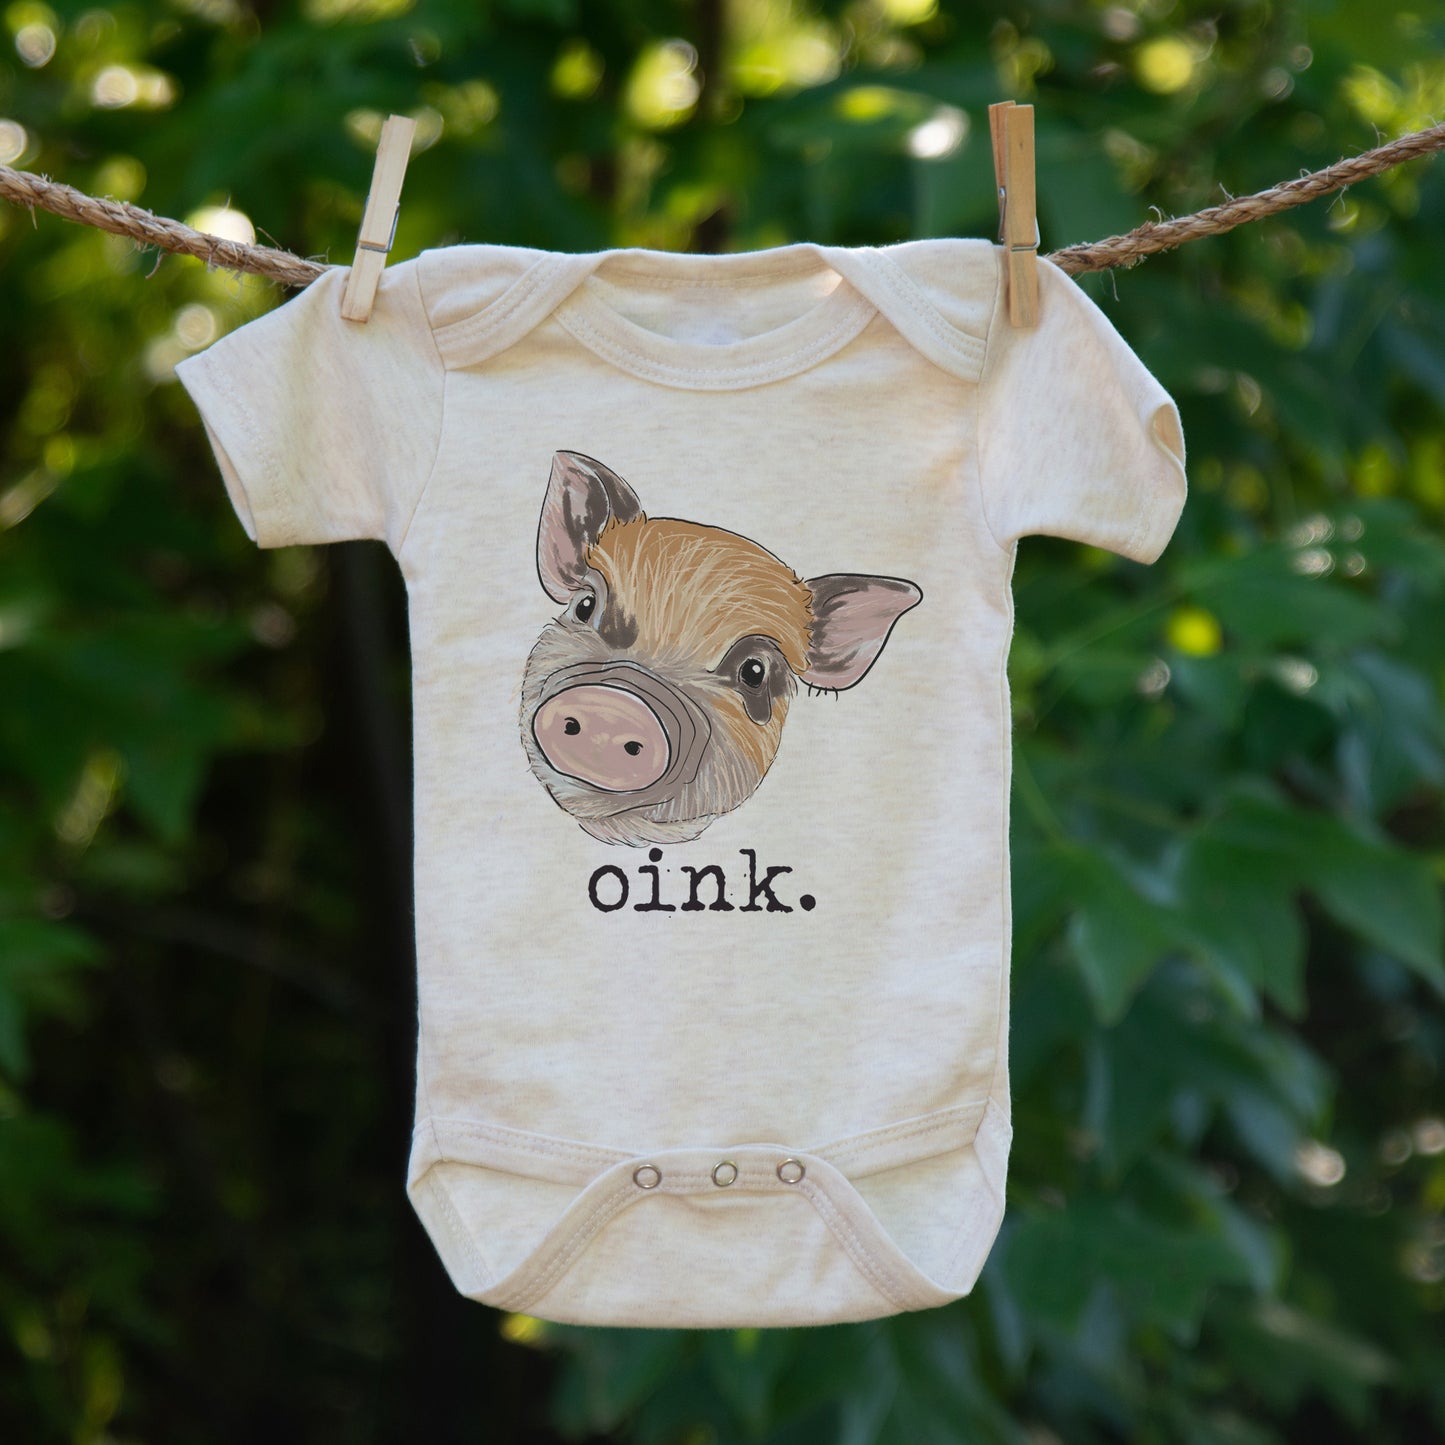 "Oink" Pig Baby Body Suit